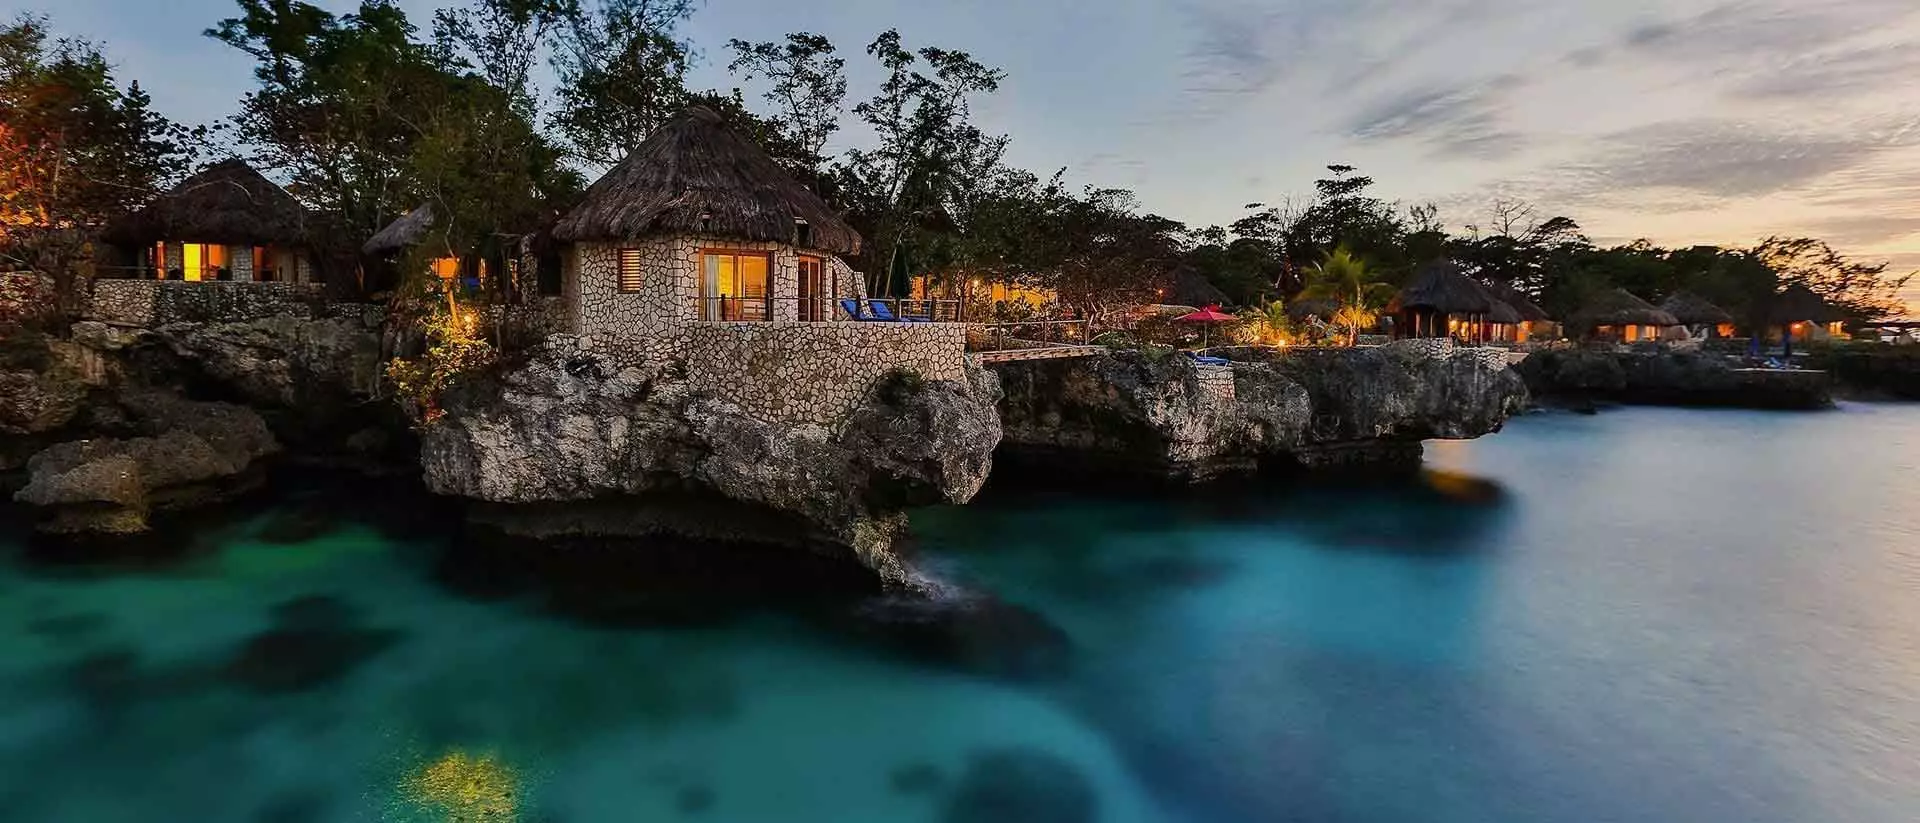 The 40-room boutique hotel spans a craggy stretch of rock above the azure waters of the Caribbean Sea (